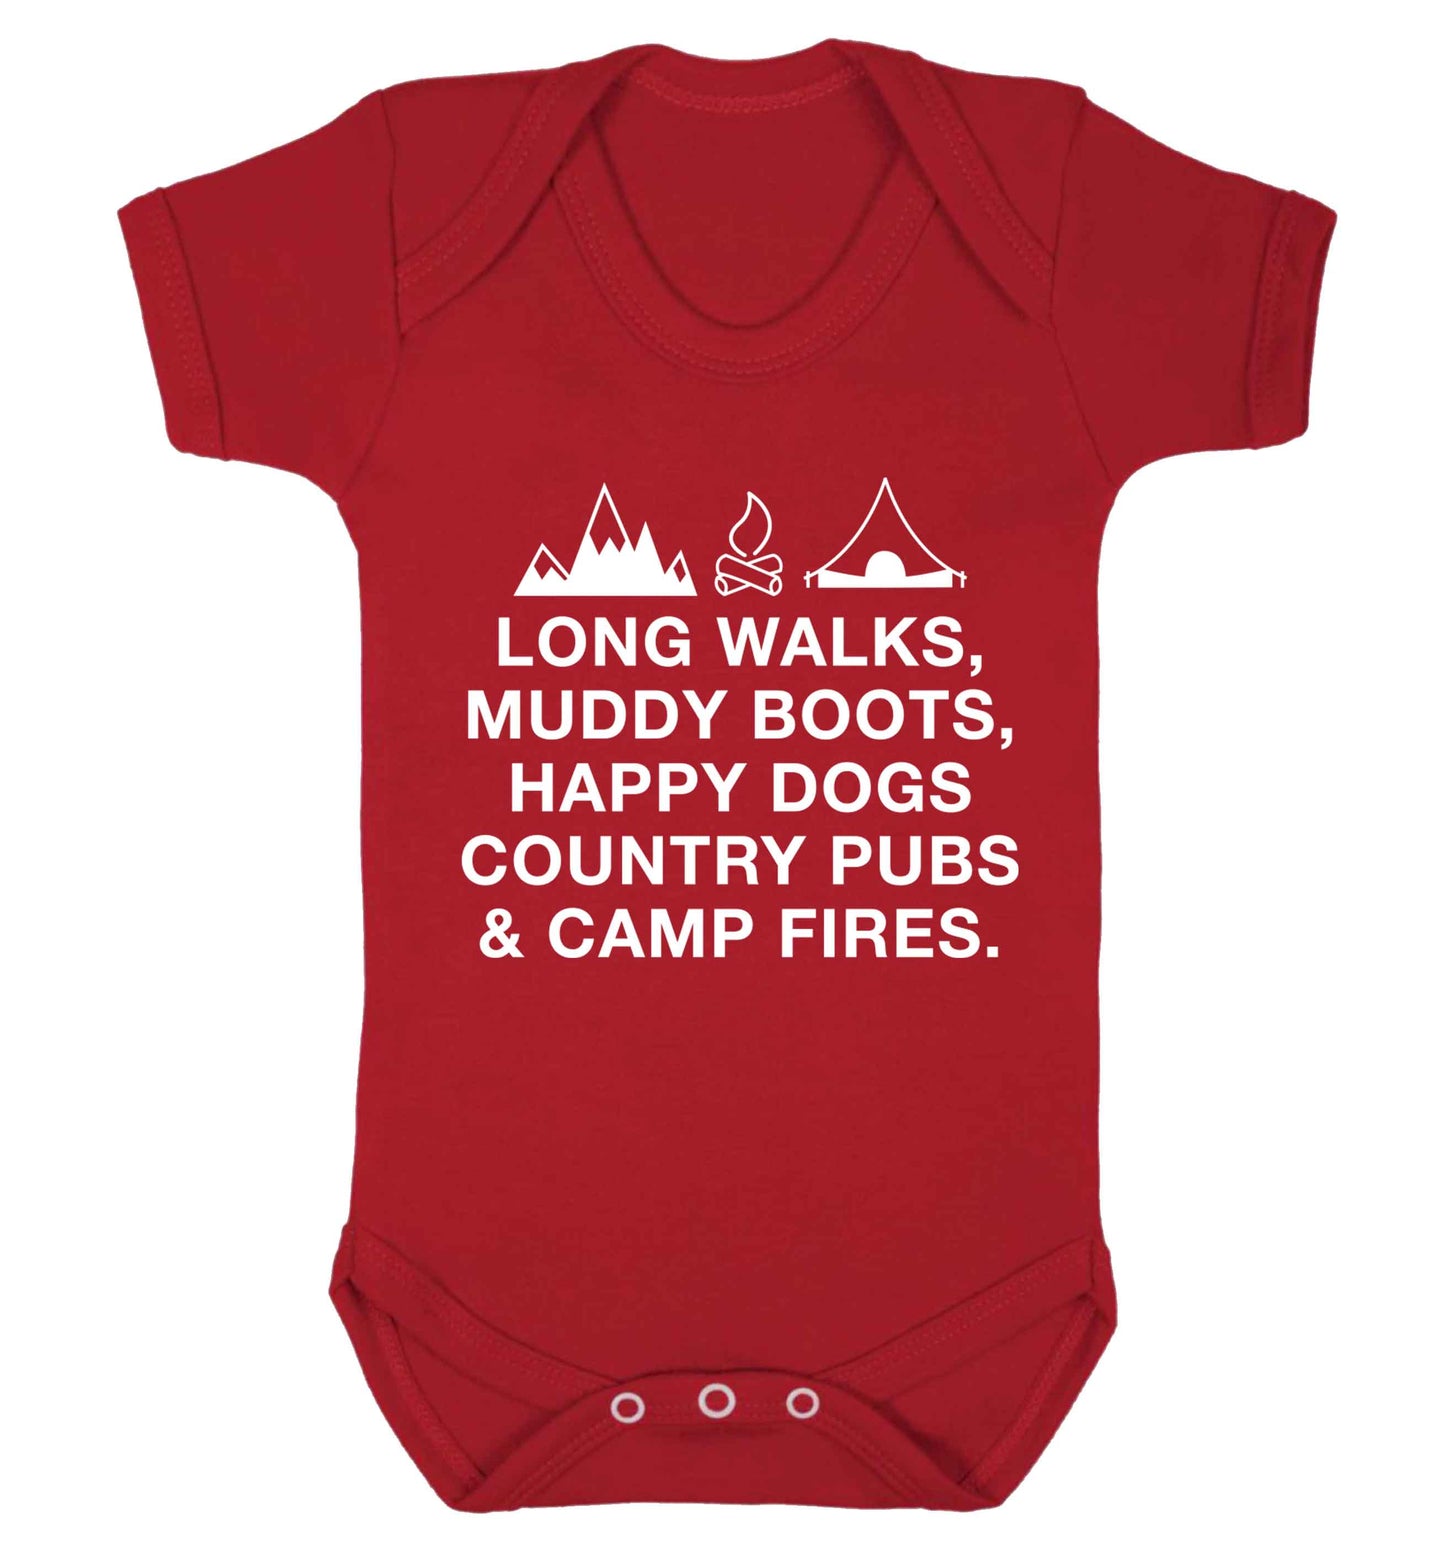 Long walks muddy boots happy dogs country pubs and camp fires Baby Vest red 18-24 months